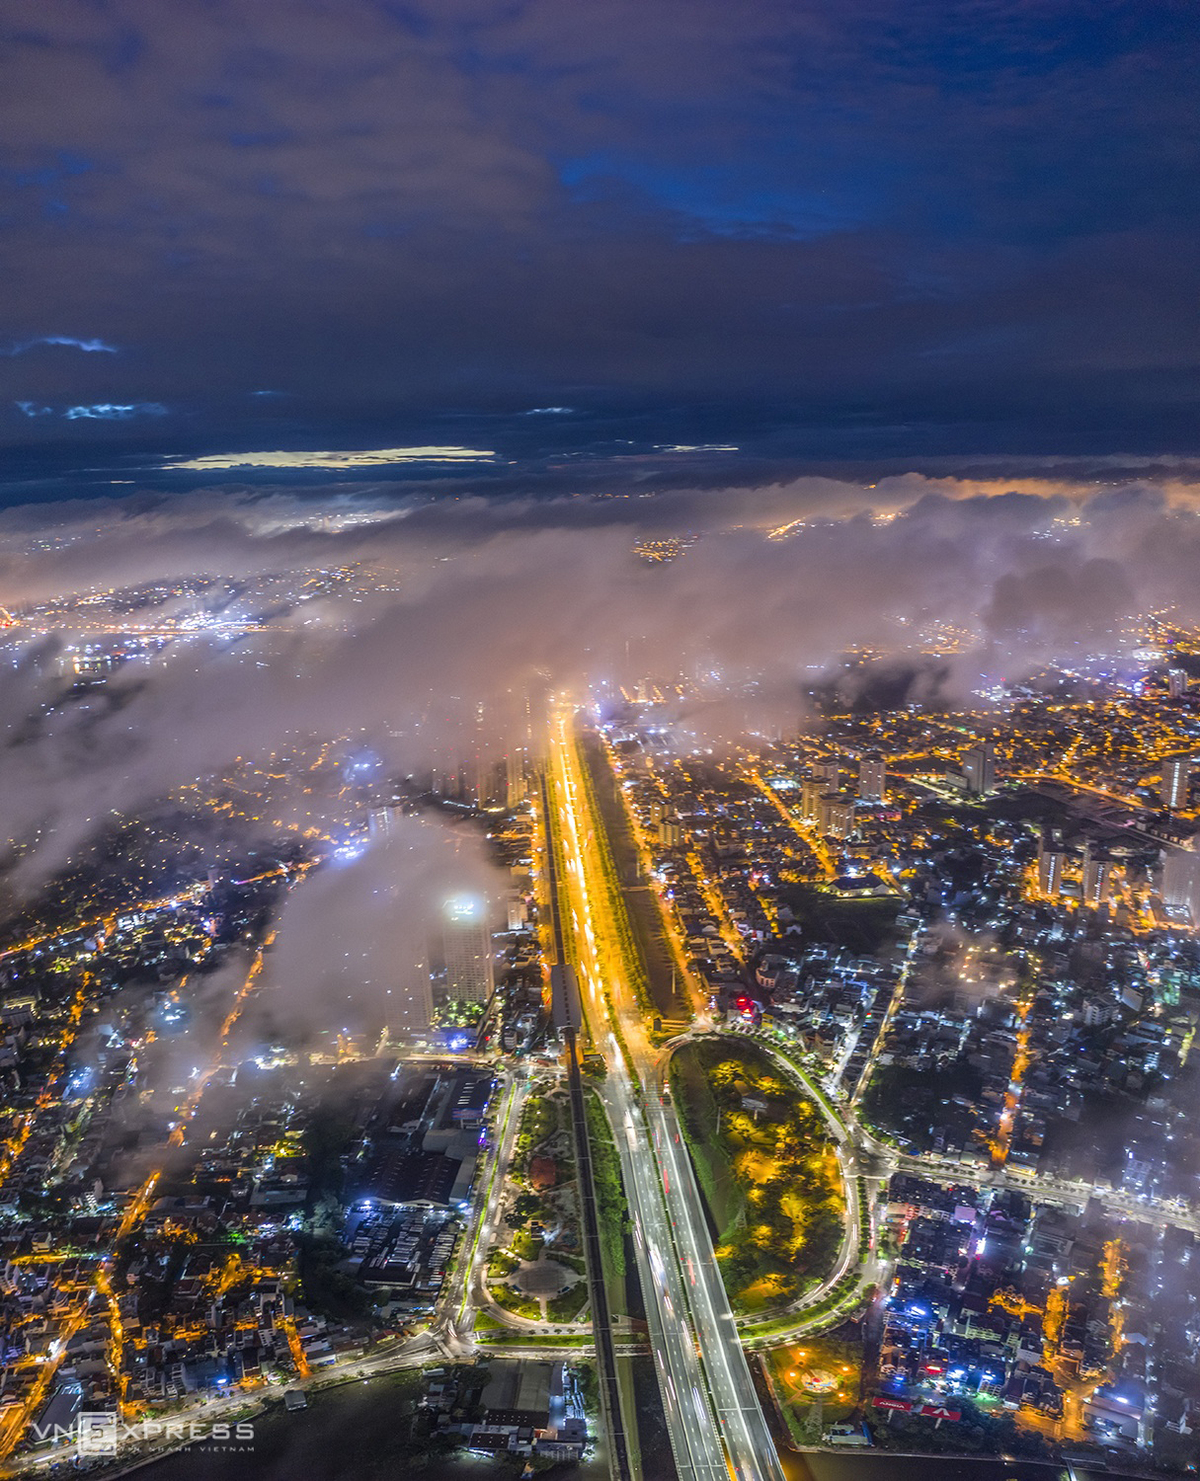 Saigon dreamy in the clouds and fog